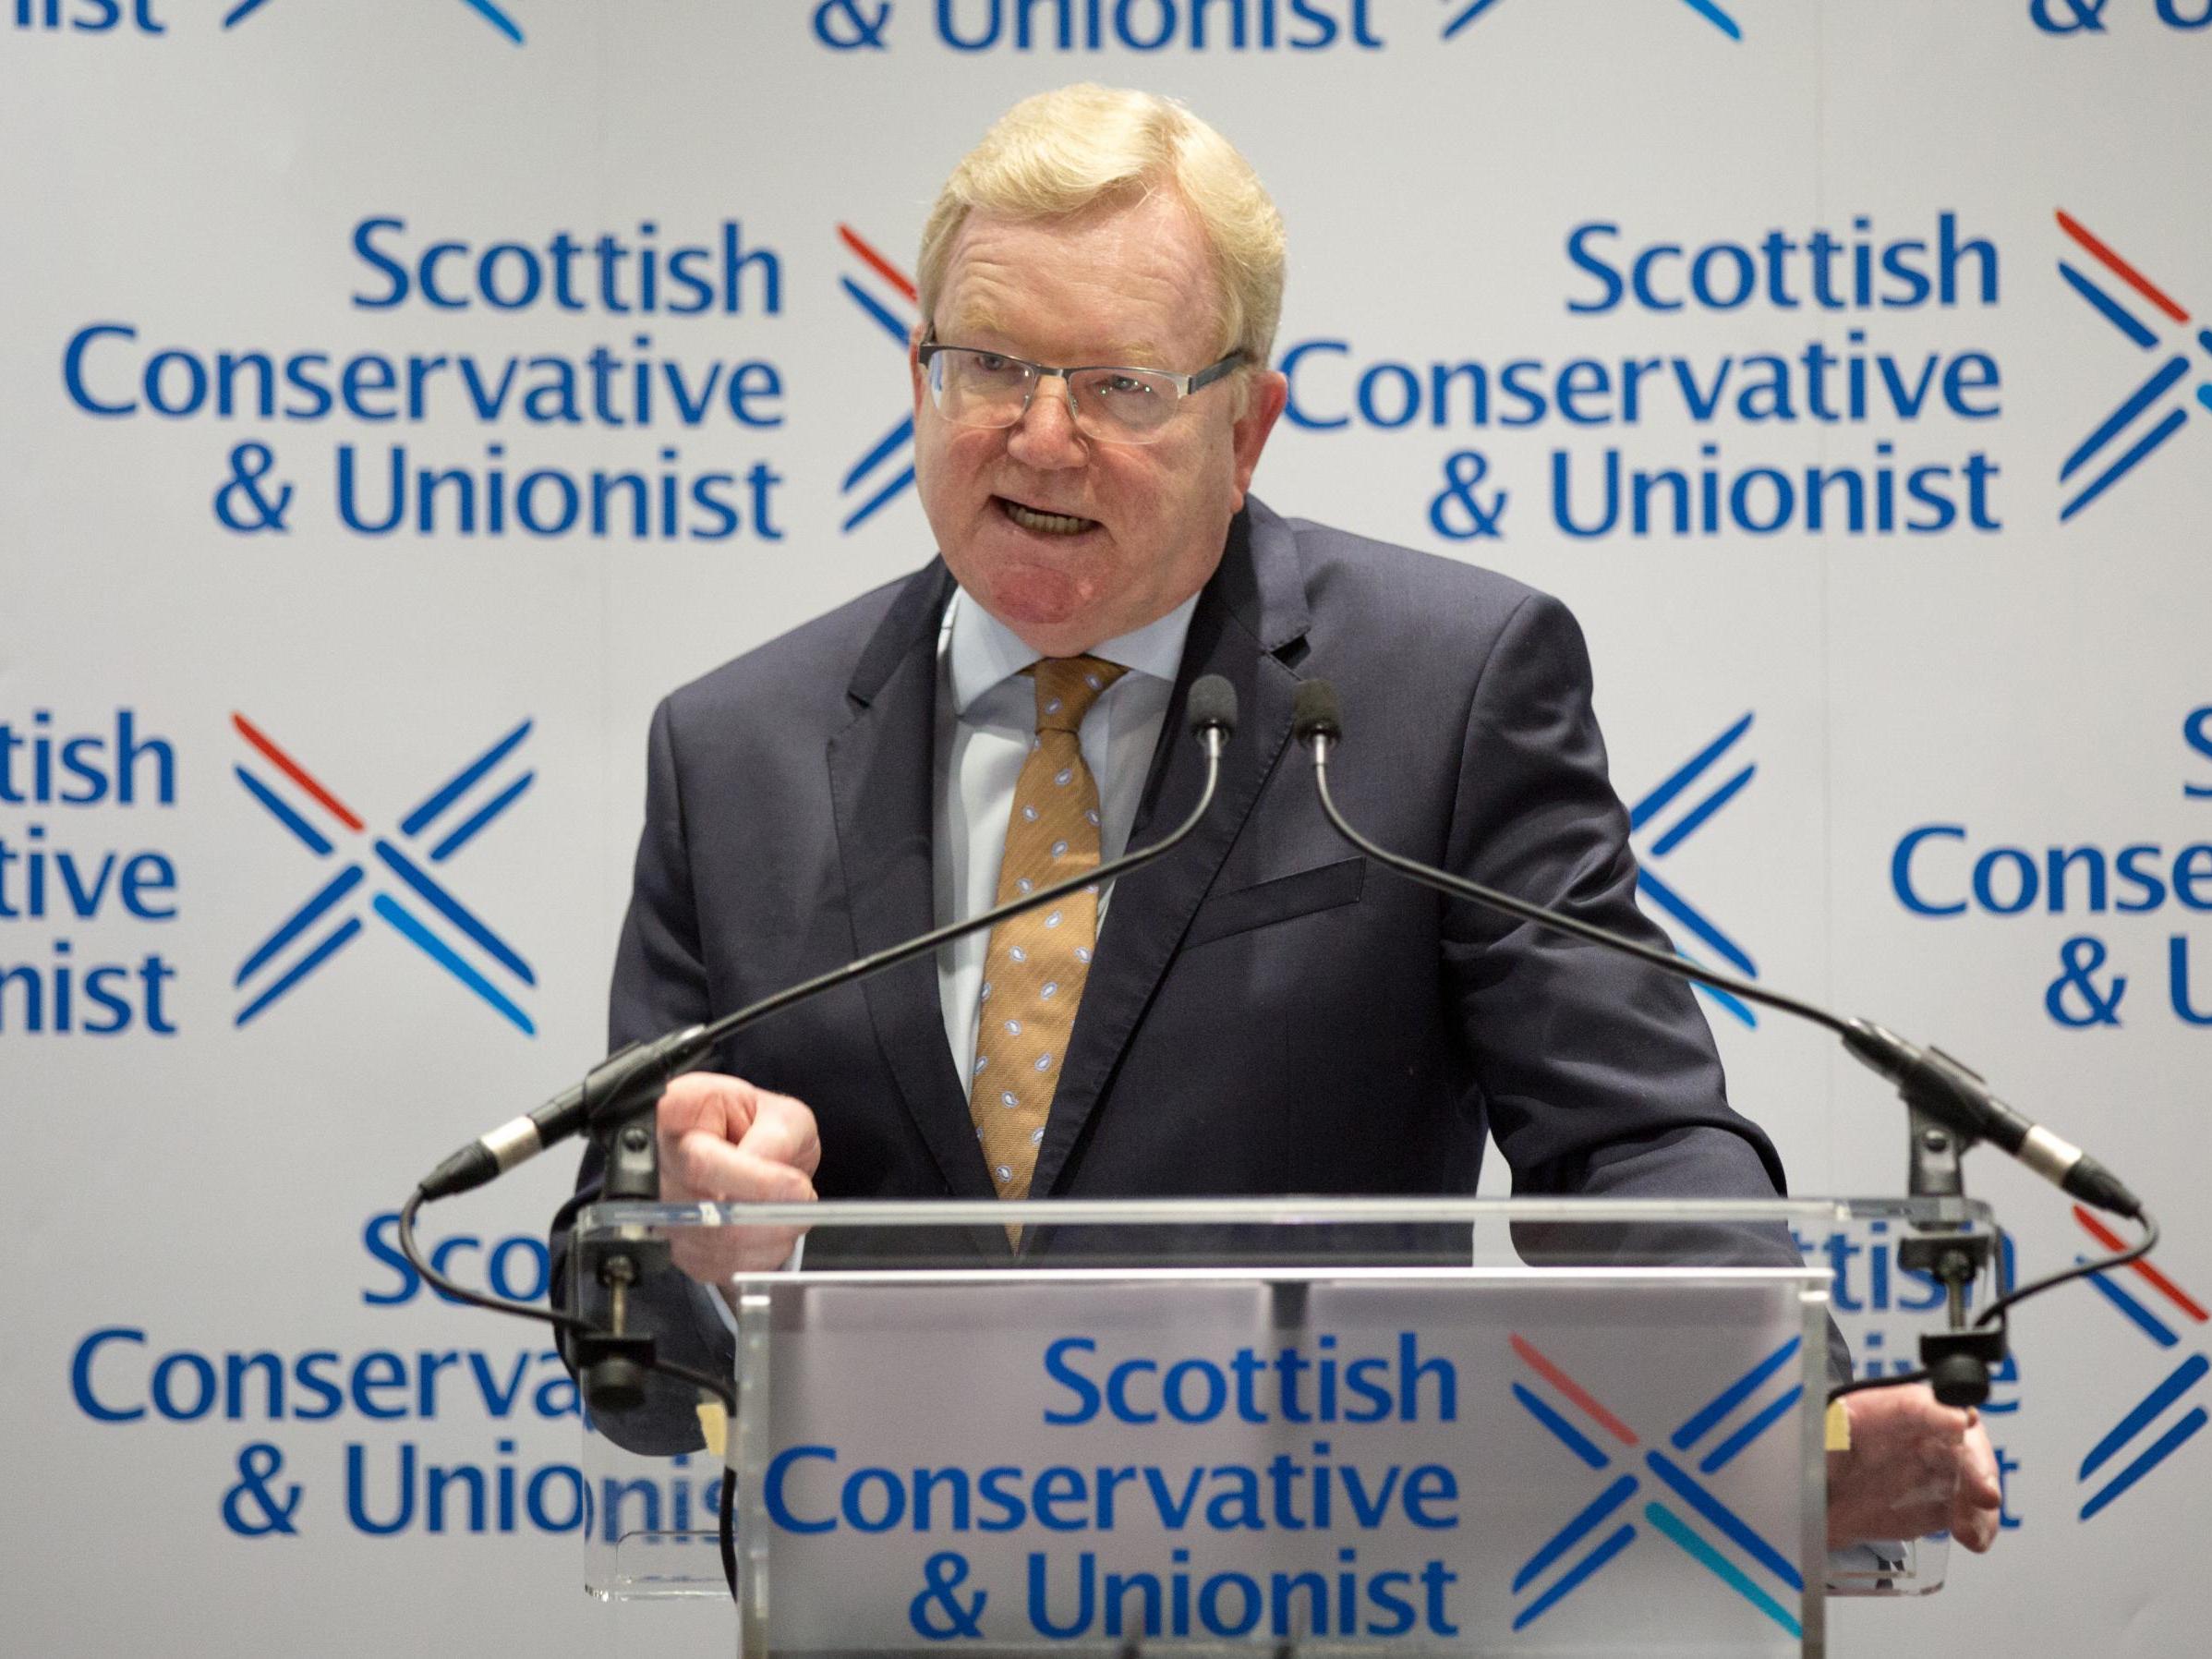 Following the resignation of then-party leader Ruth Davidson in August 2019, Jackson Carlaw had been the party's interim leader